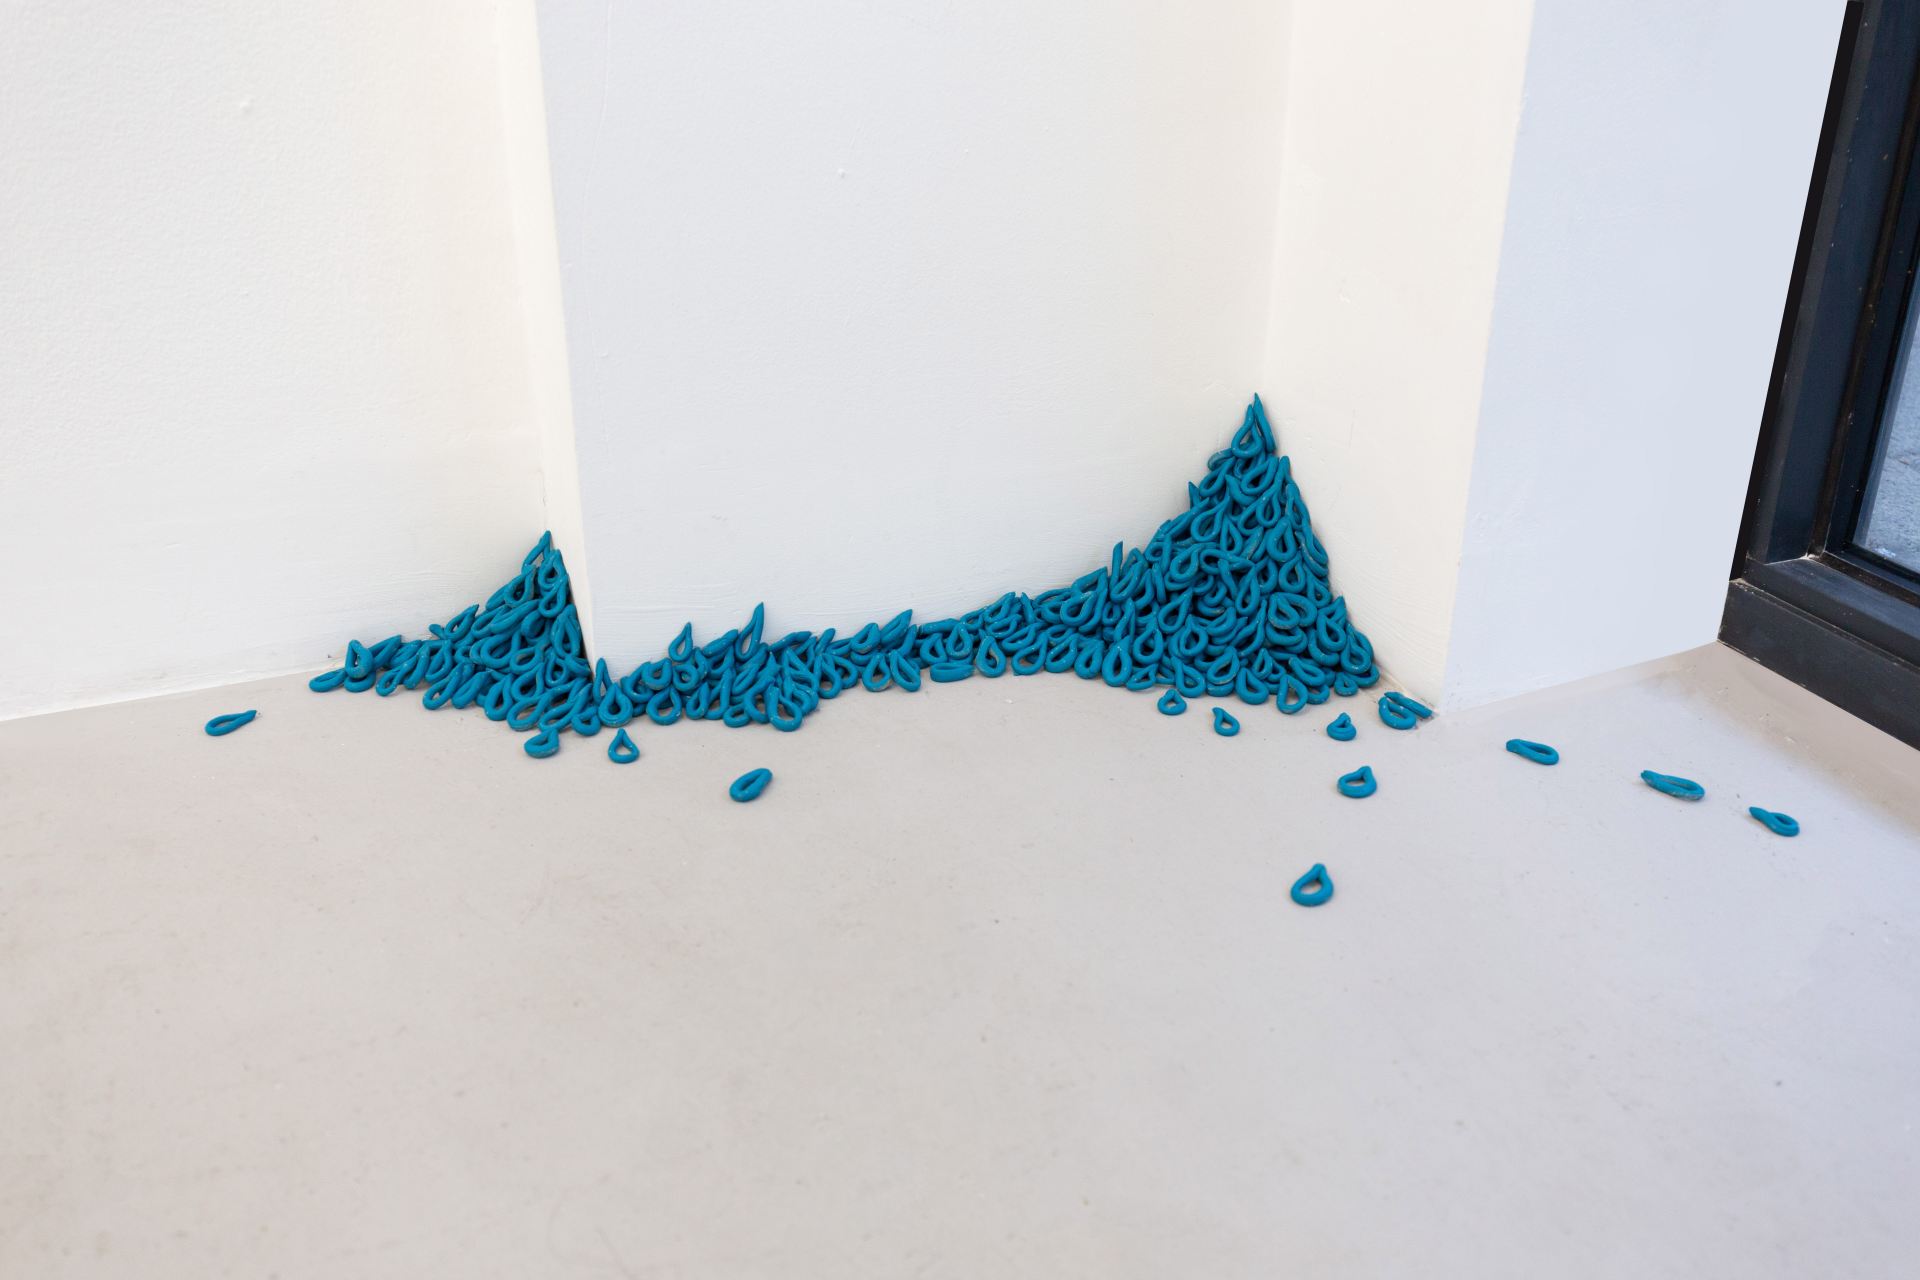 An image of many blue objects that look like teardrops, in two corners of an installation.